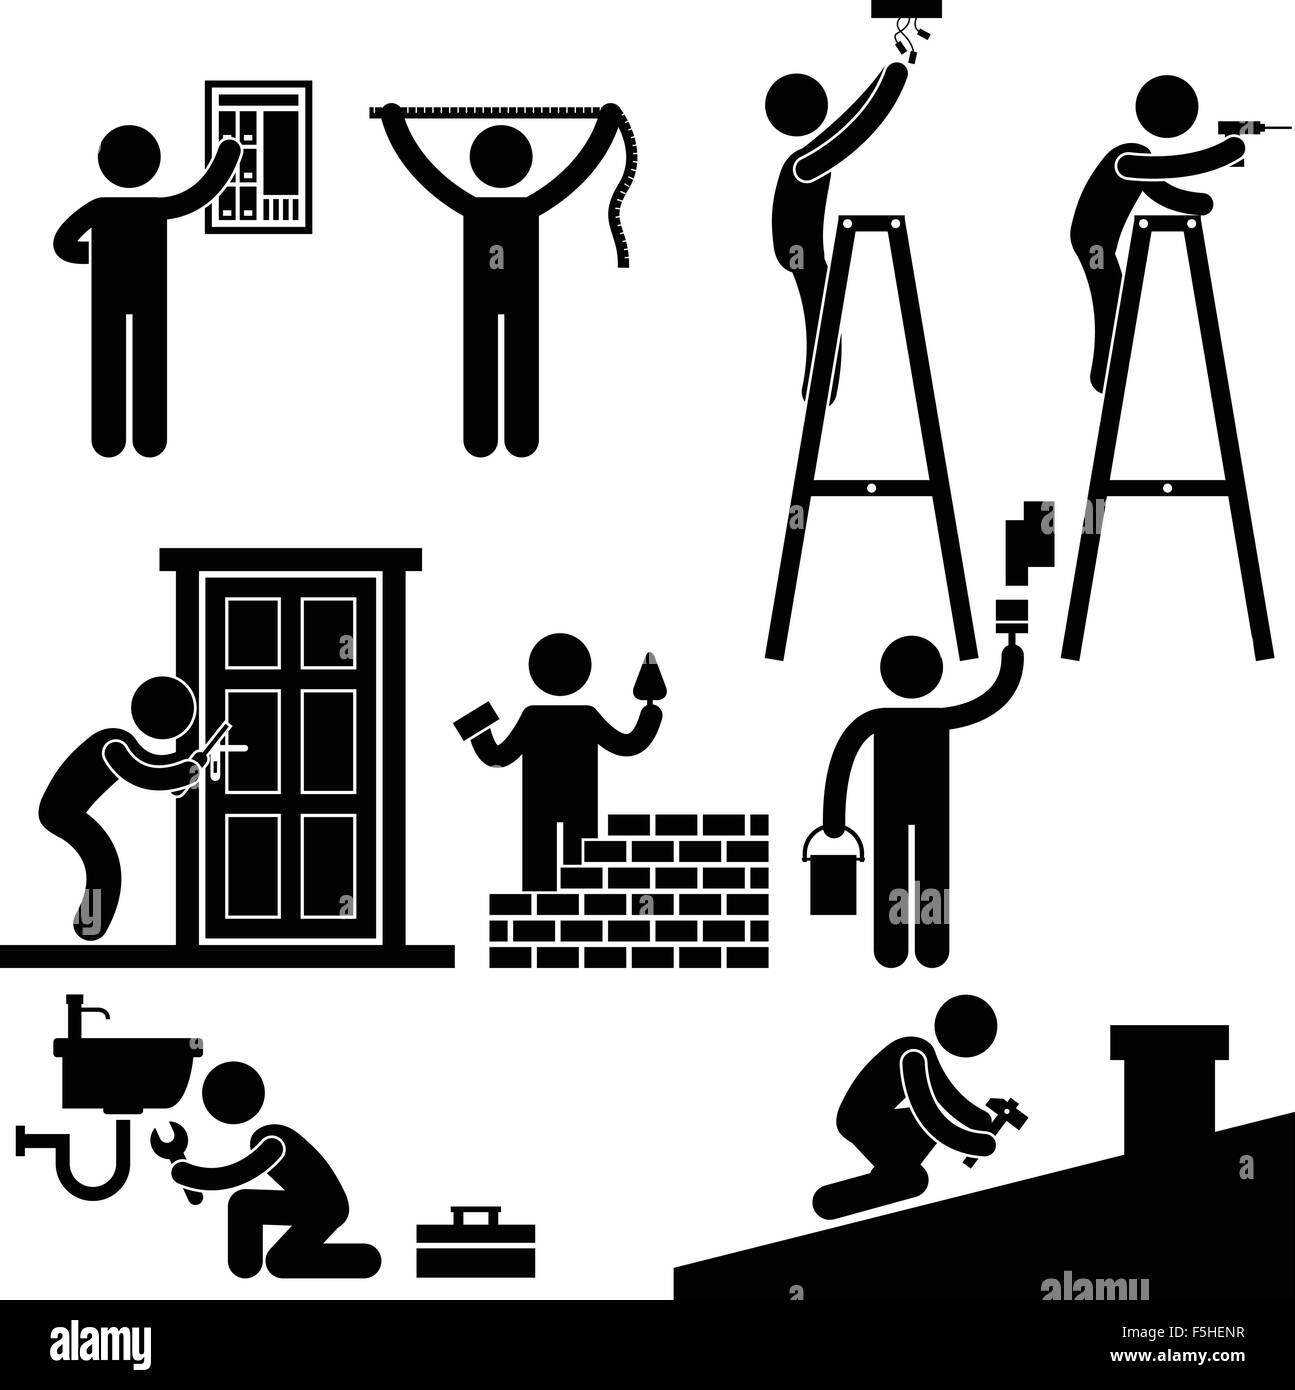 Handyman Electrician Locksmith Contractor Working Fixing Repair House Light Roof Icon Symbol Sign Pictogram Stock Vector